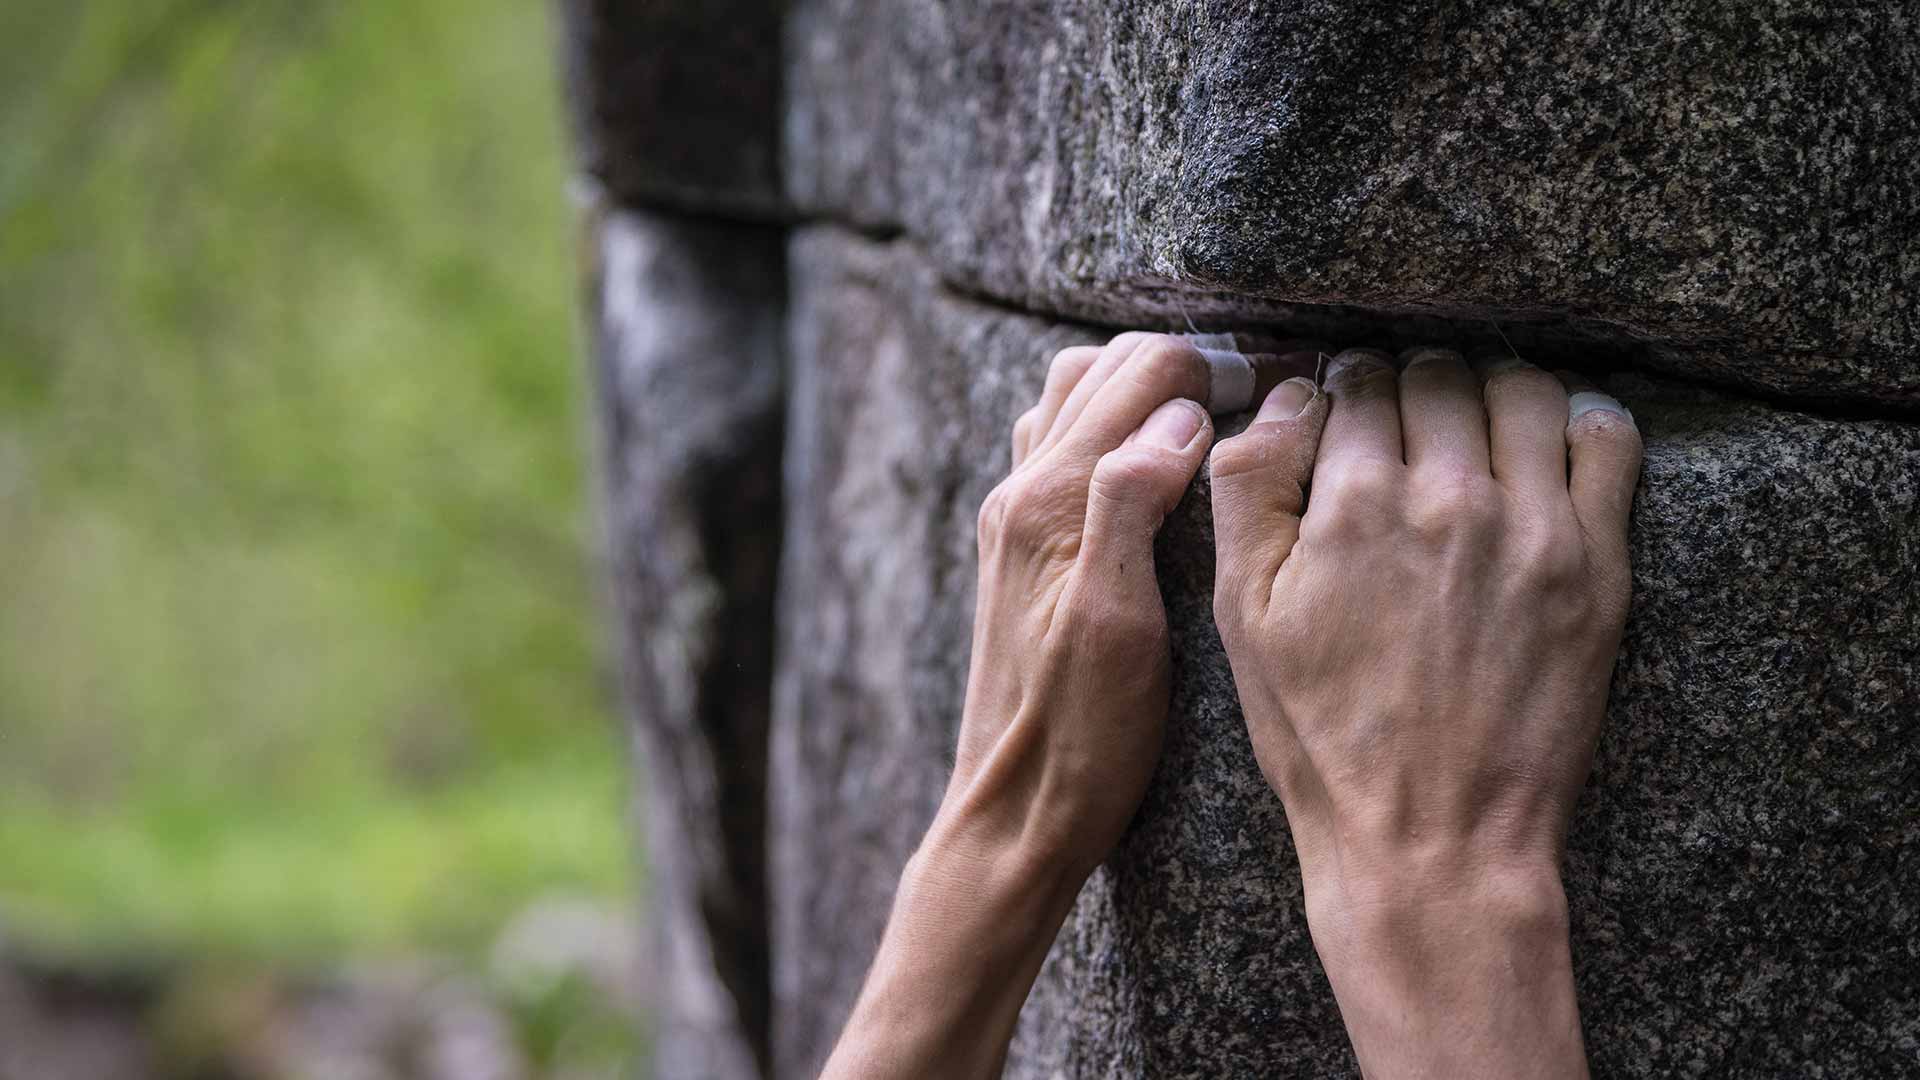 Hands gripping a rock ledge, holding themselves up